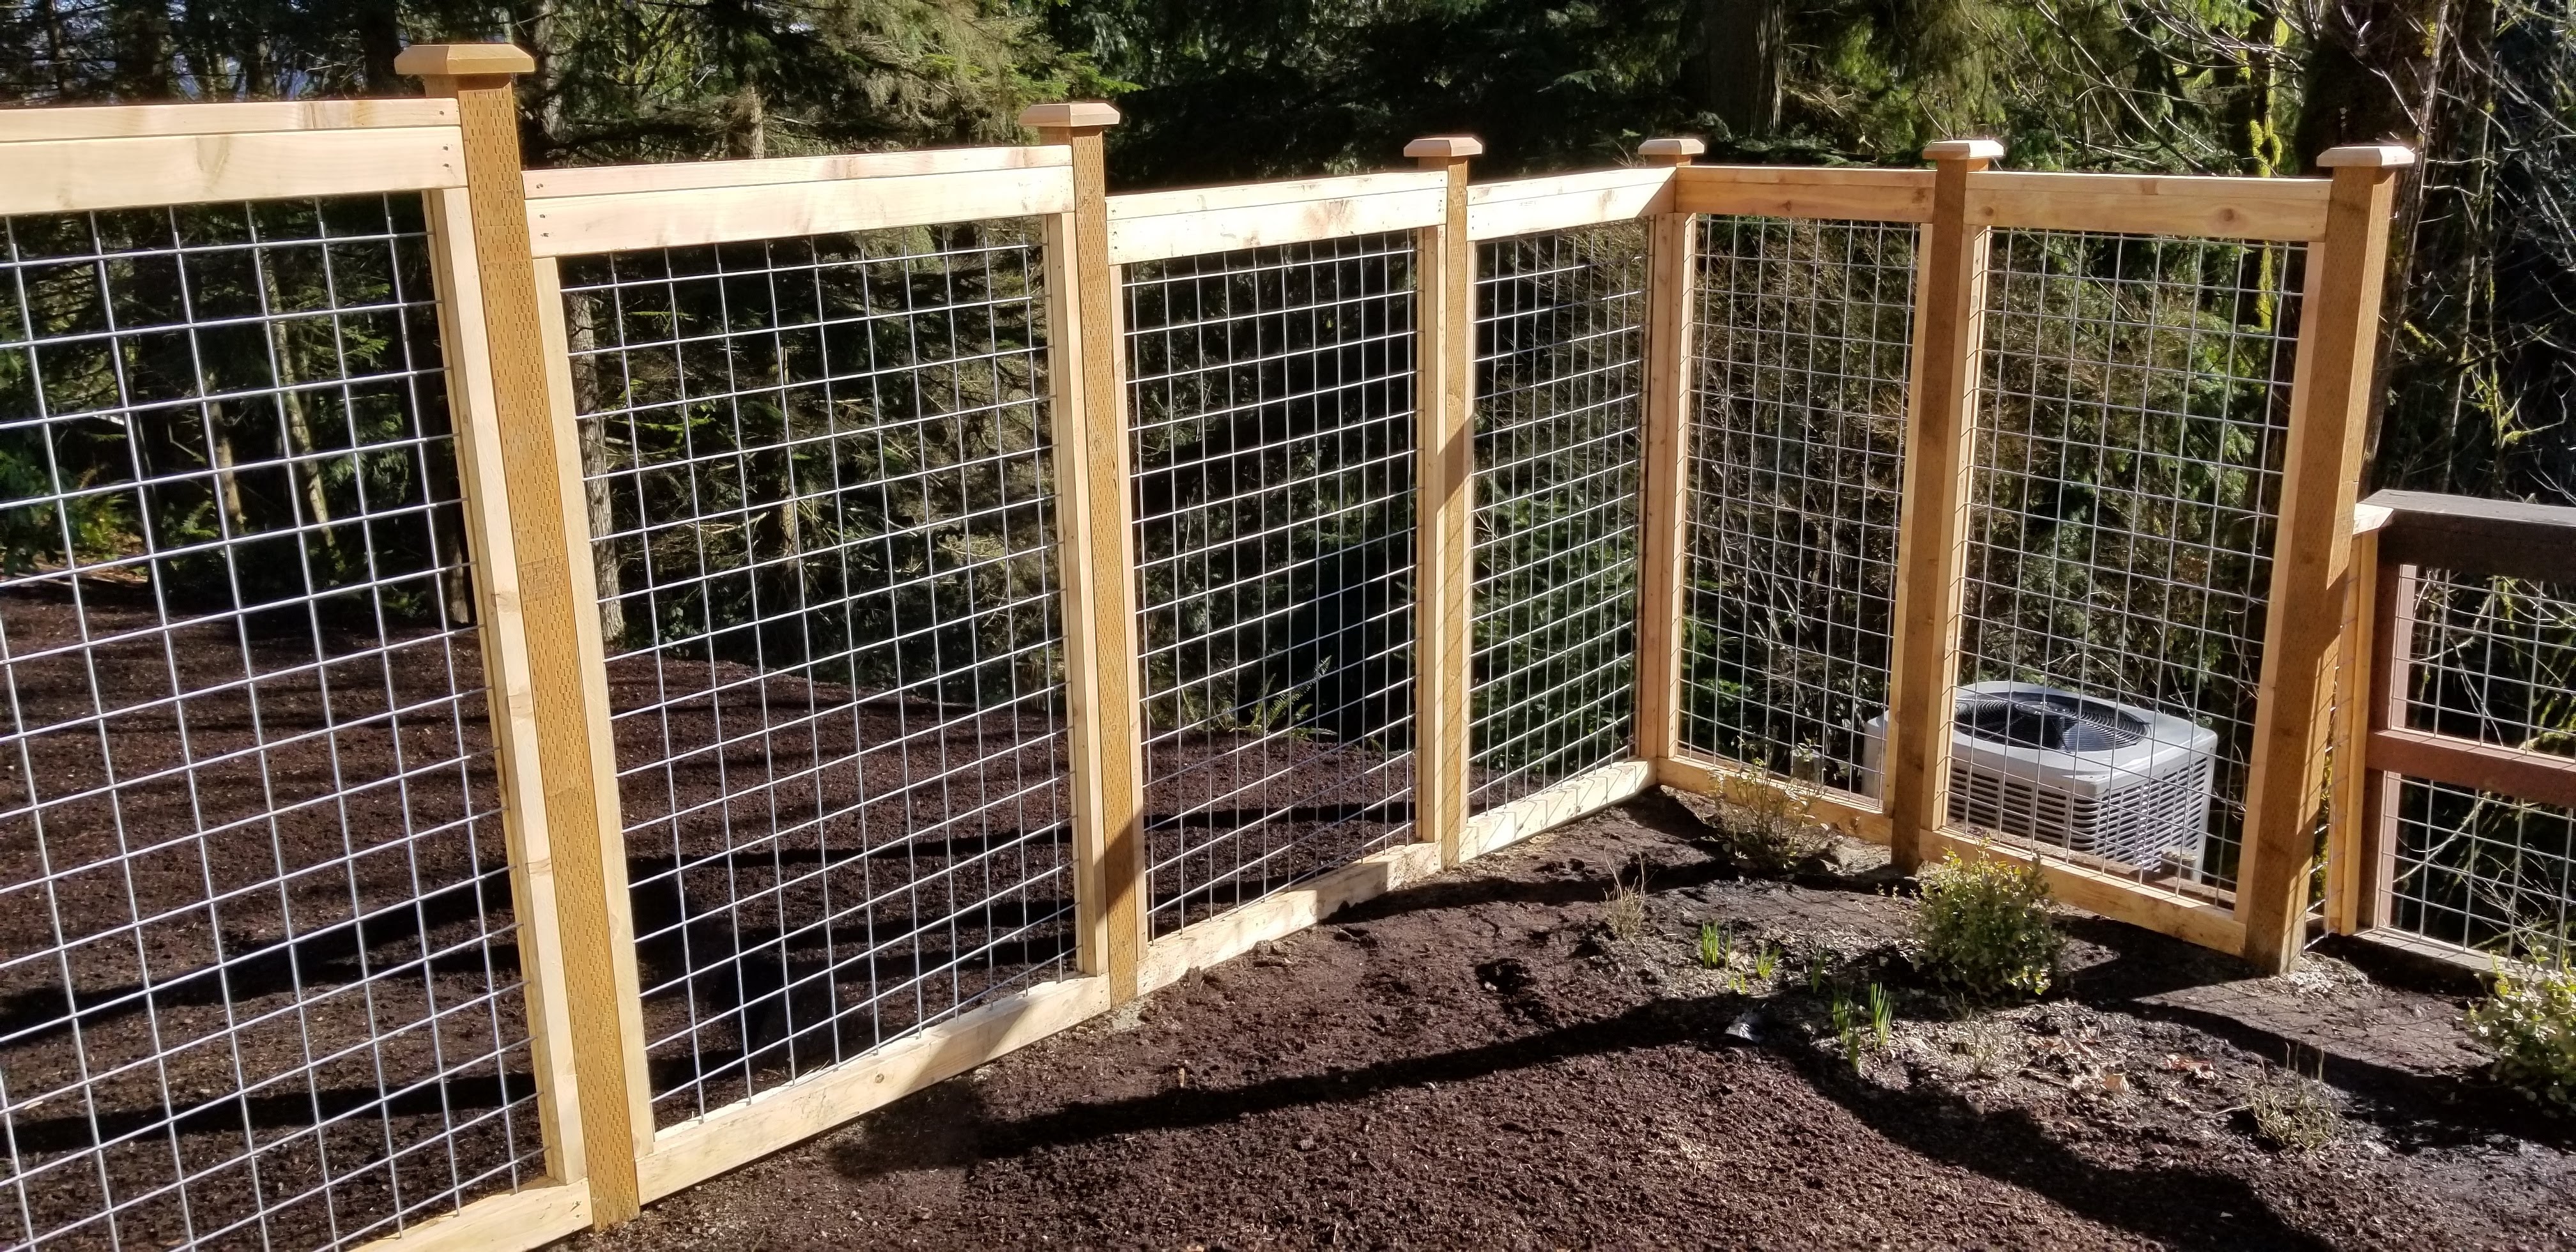 6'FT HOG-WIRE FENCE